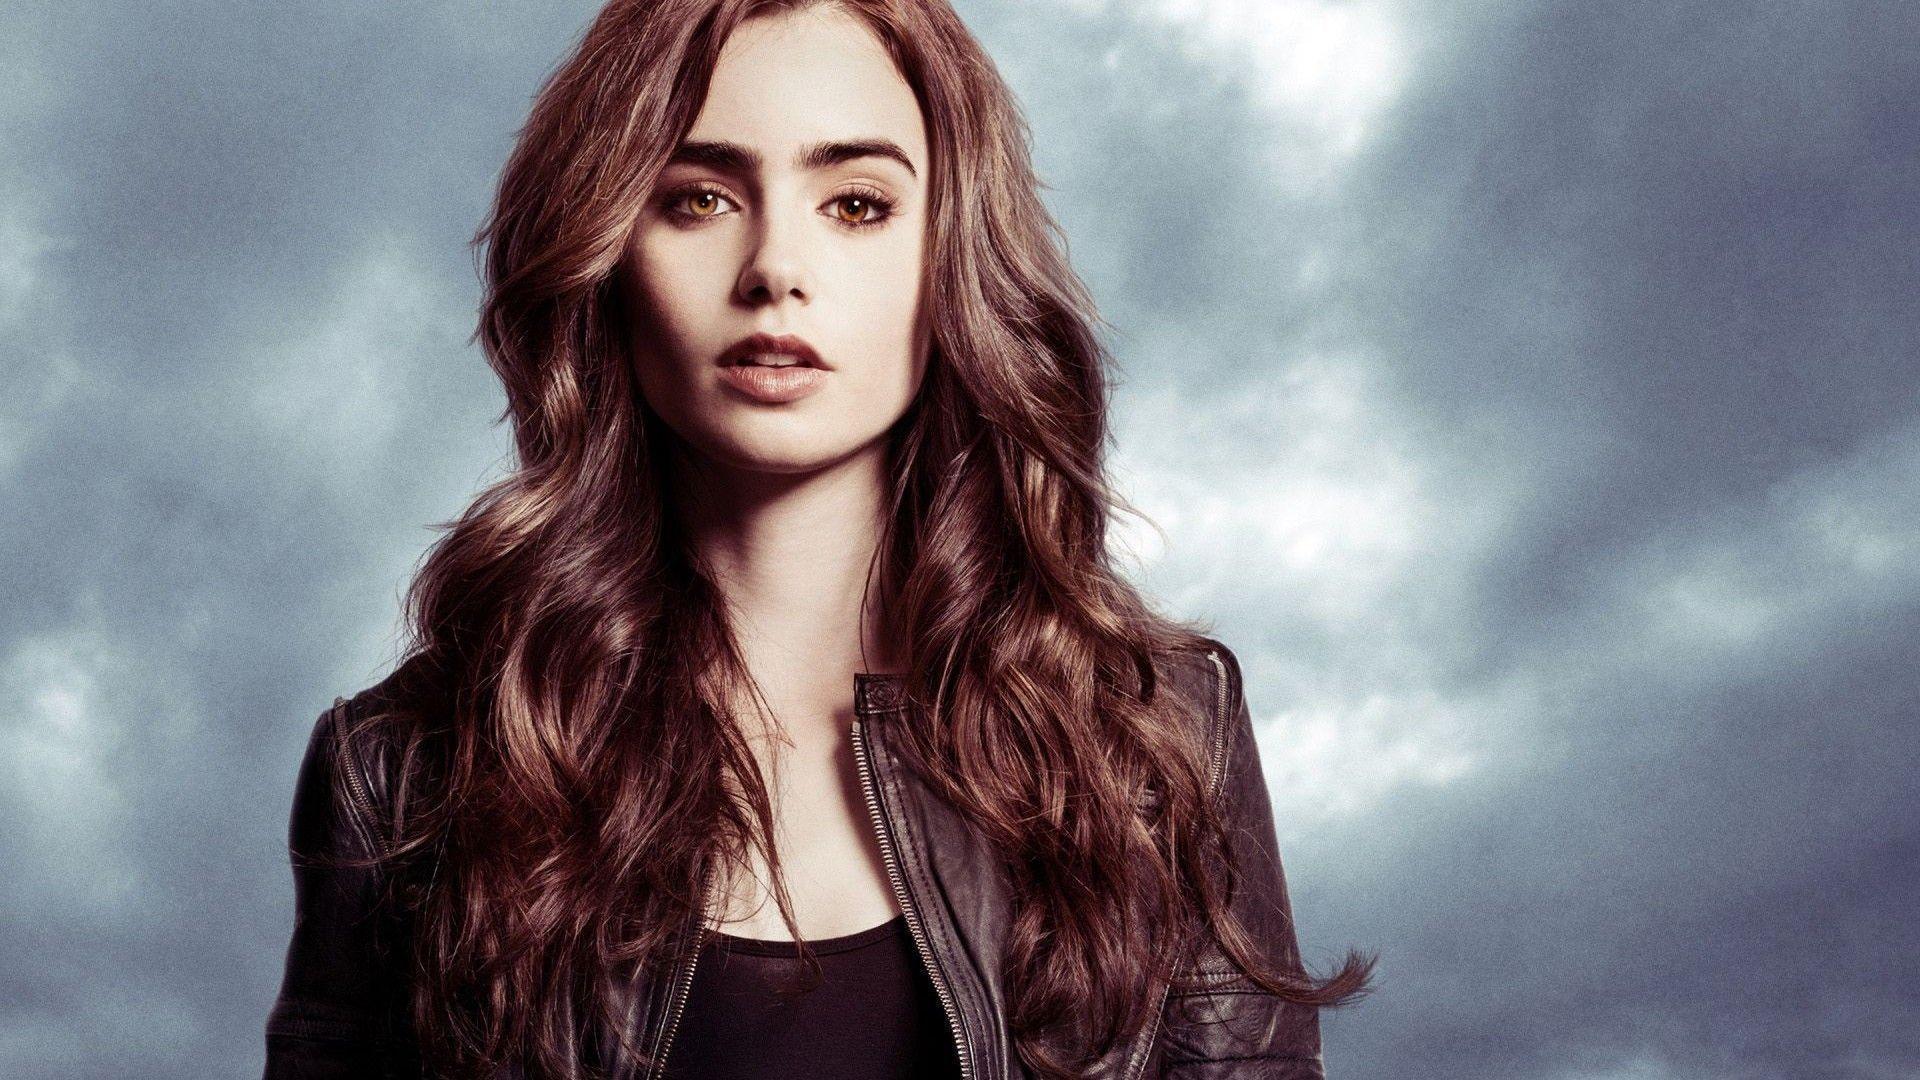 Lily Collins In The Mortal Instruments City Of Bones / Wallpaper as